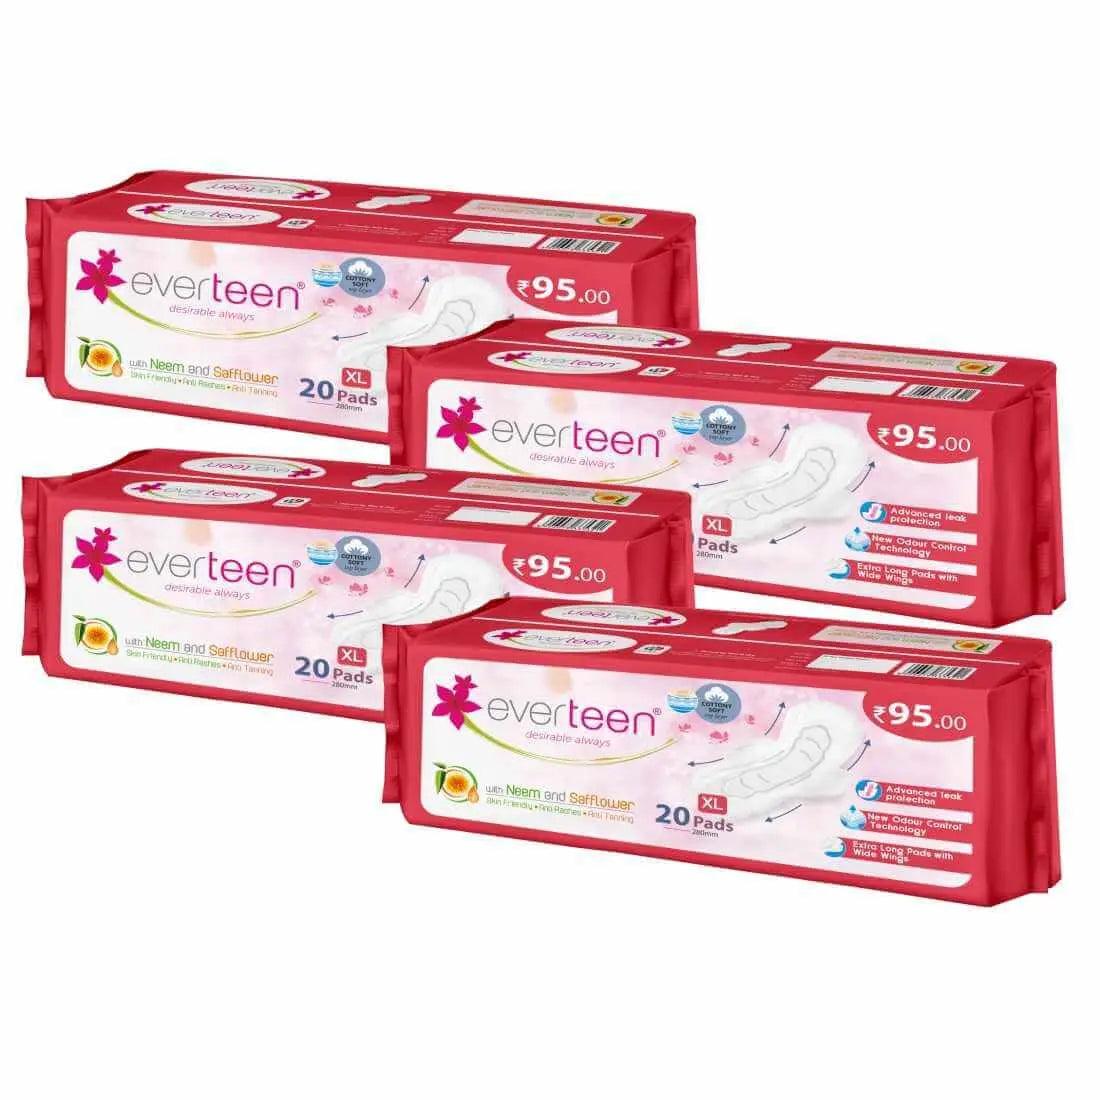 everteen XL Sanitary Napkin Pads with Neem and Safflower for Women - 20 Pads, 280mm 8903540010688